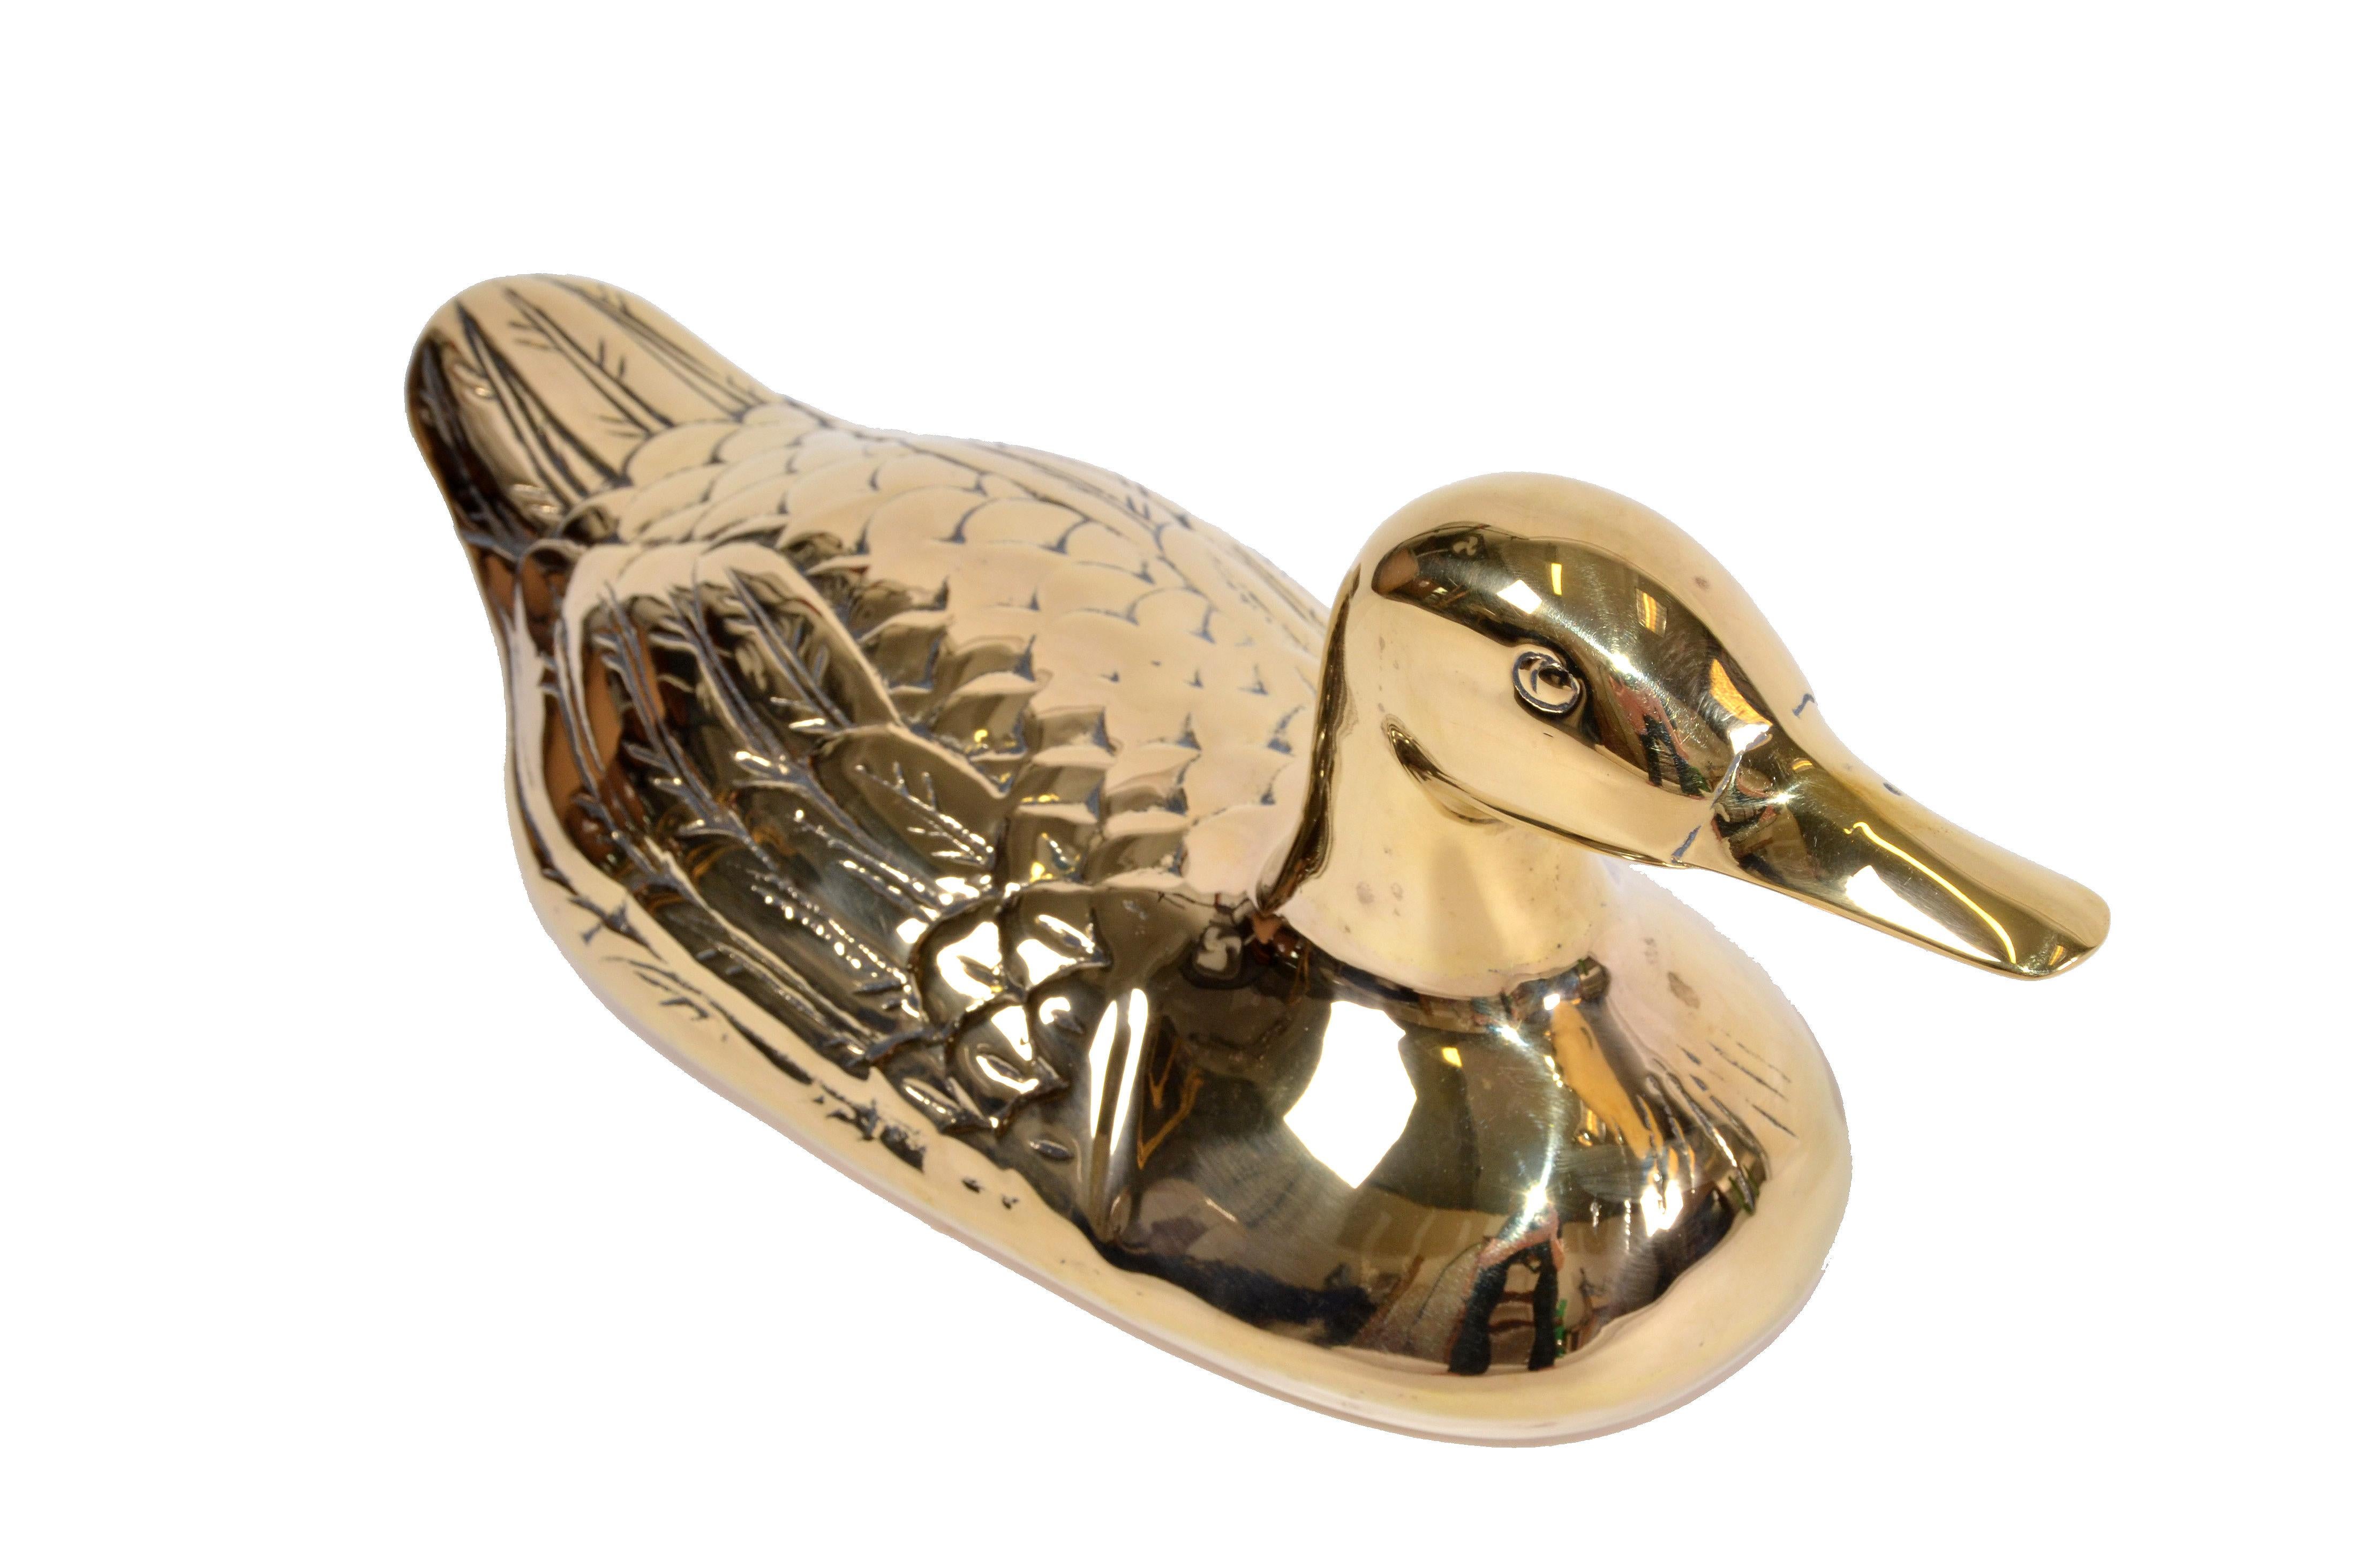 Mid-Century Modern polished decorative heavy bronze duck, animal sculpture or table decor.
Great Gift Idea for the Holiday Season.   